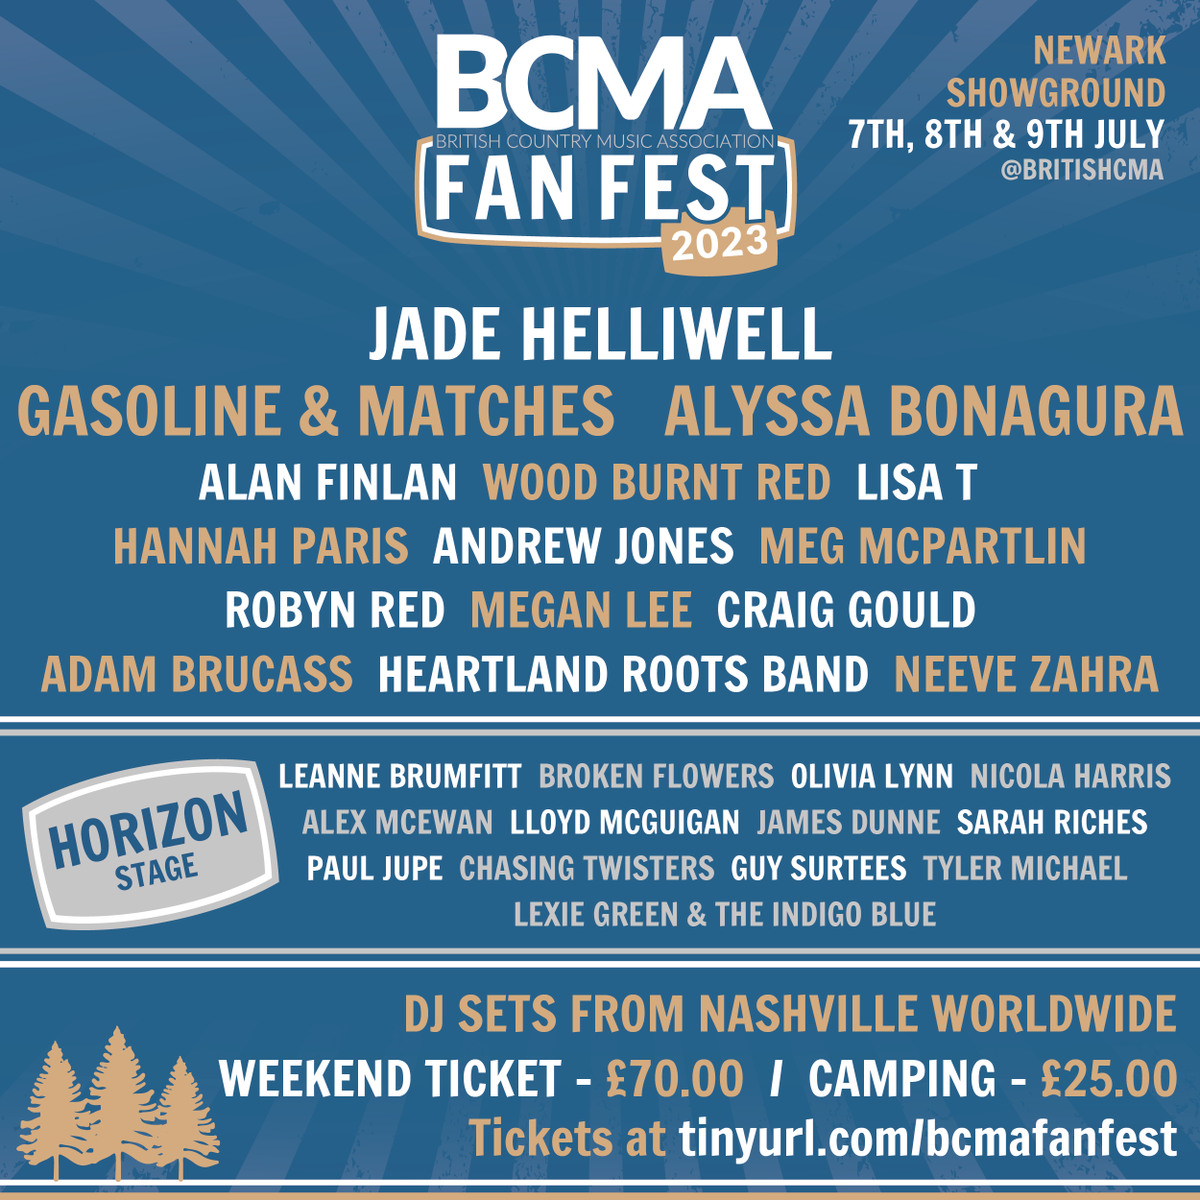 We had a chat with Jeanne and the @britishcma team about the upcoming BCMA FanFest 🎸 Find out more about the selection process, ticket details, and the teams' 'Ones to Watch' 🤠 scarletriverpr.com/post/british-c…